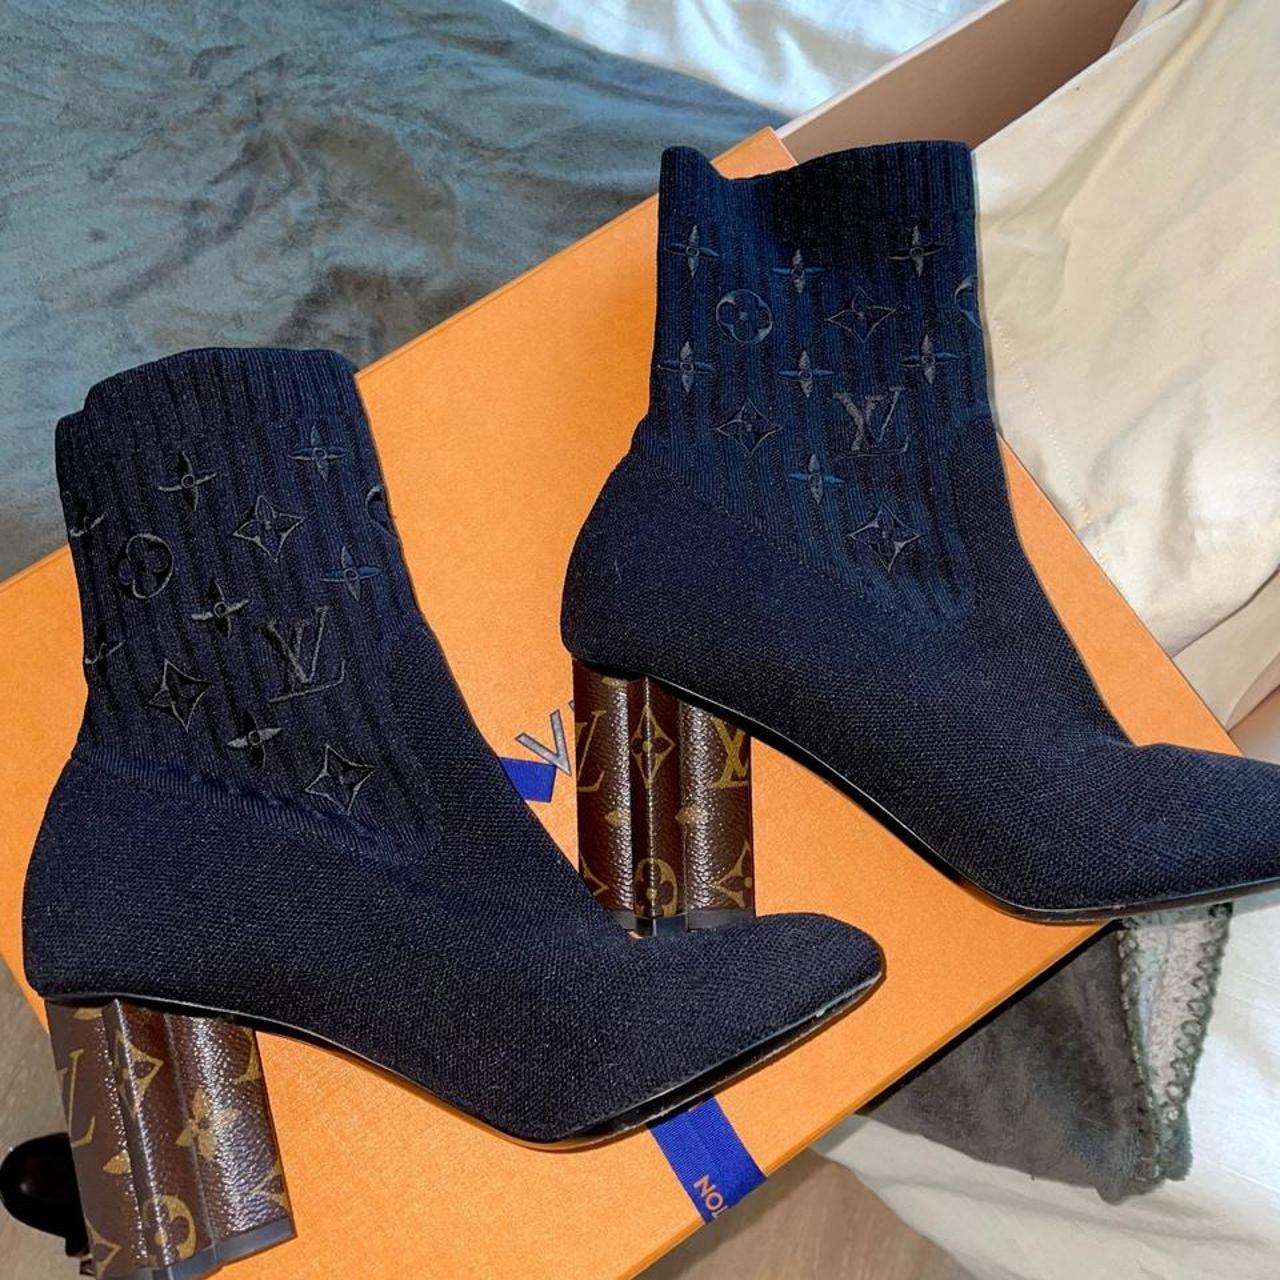 louisvuitton silhouette ankle boots  eBay